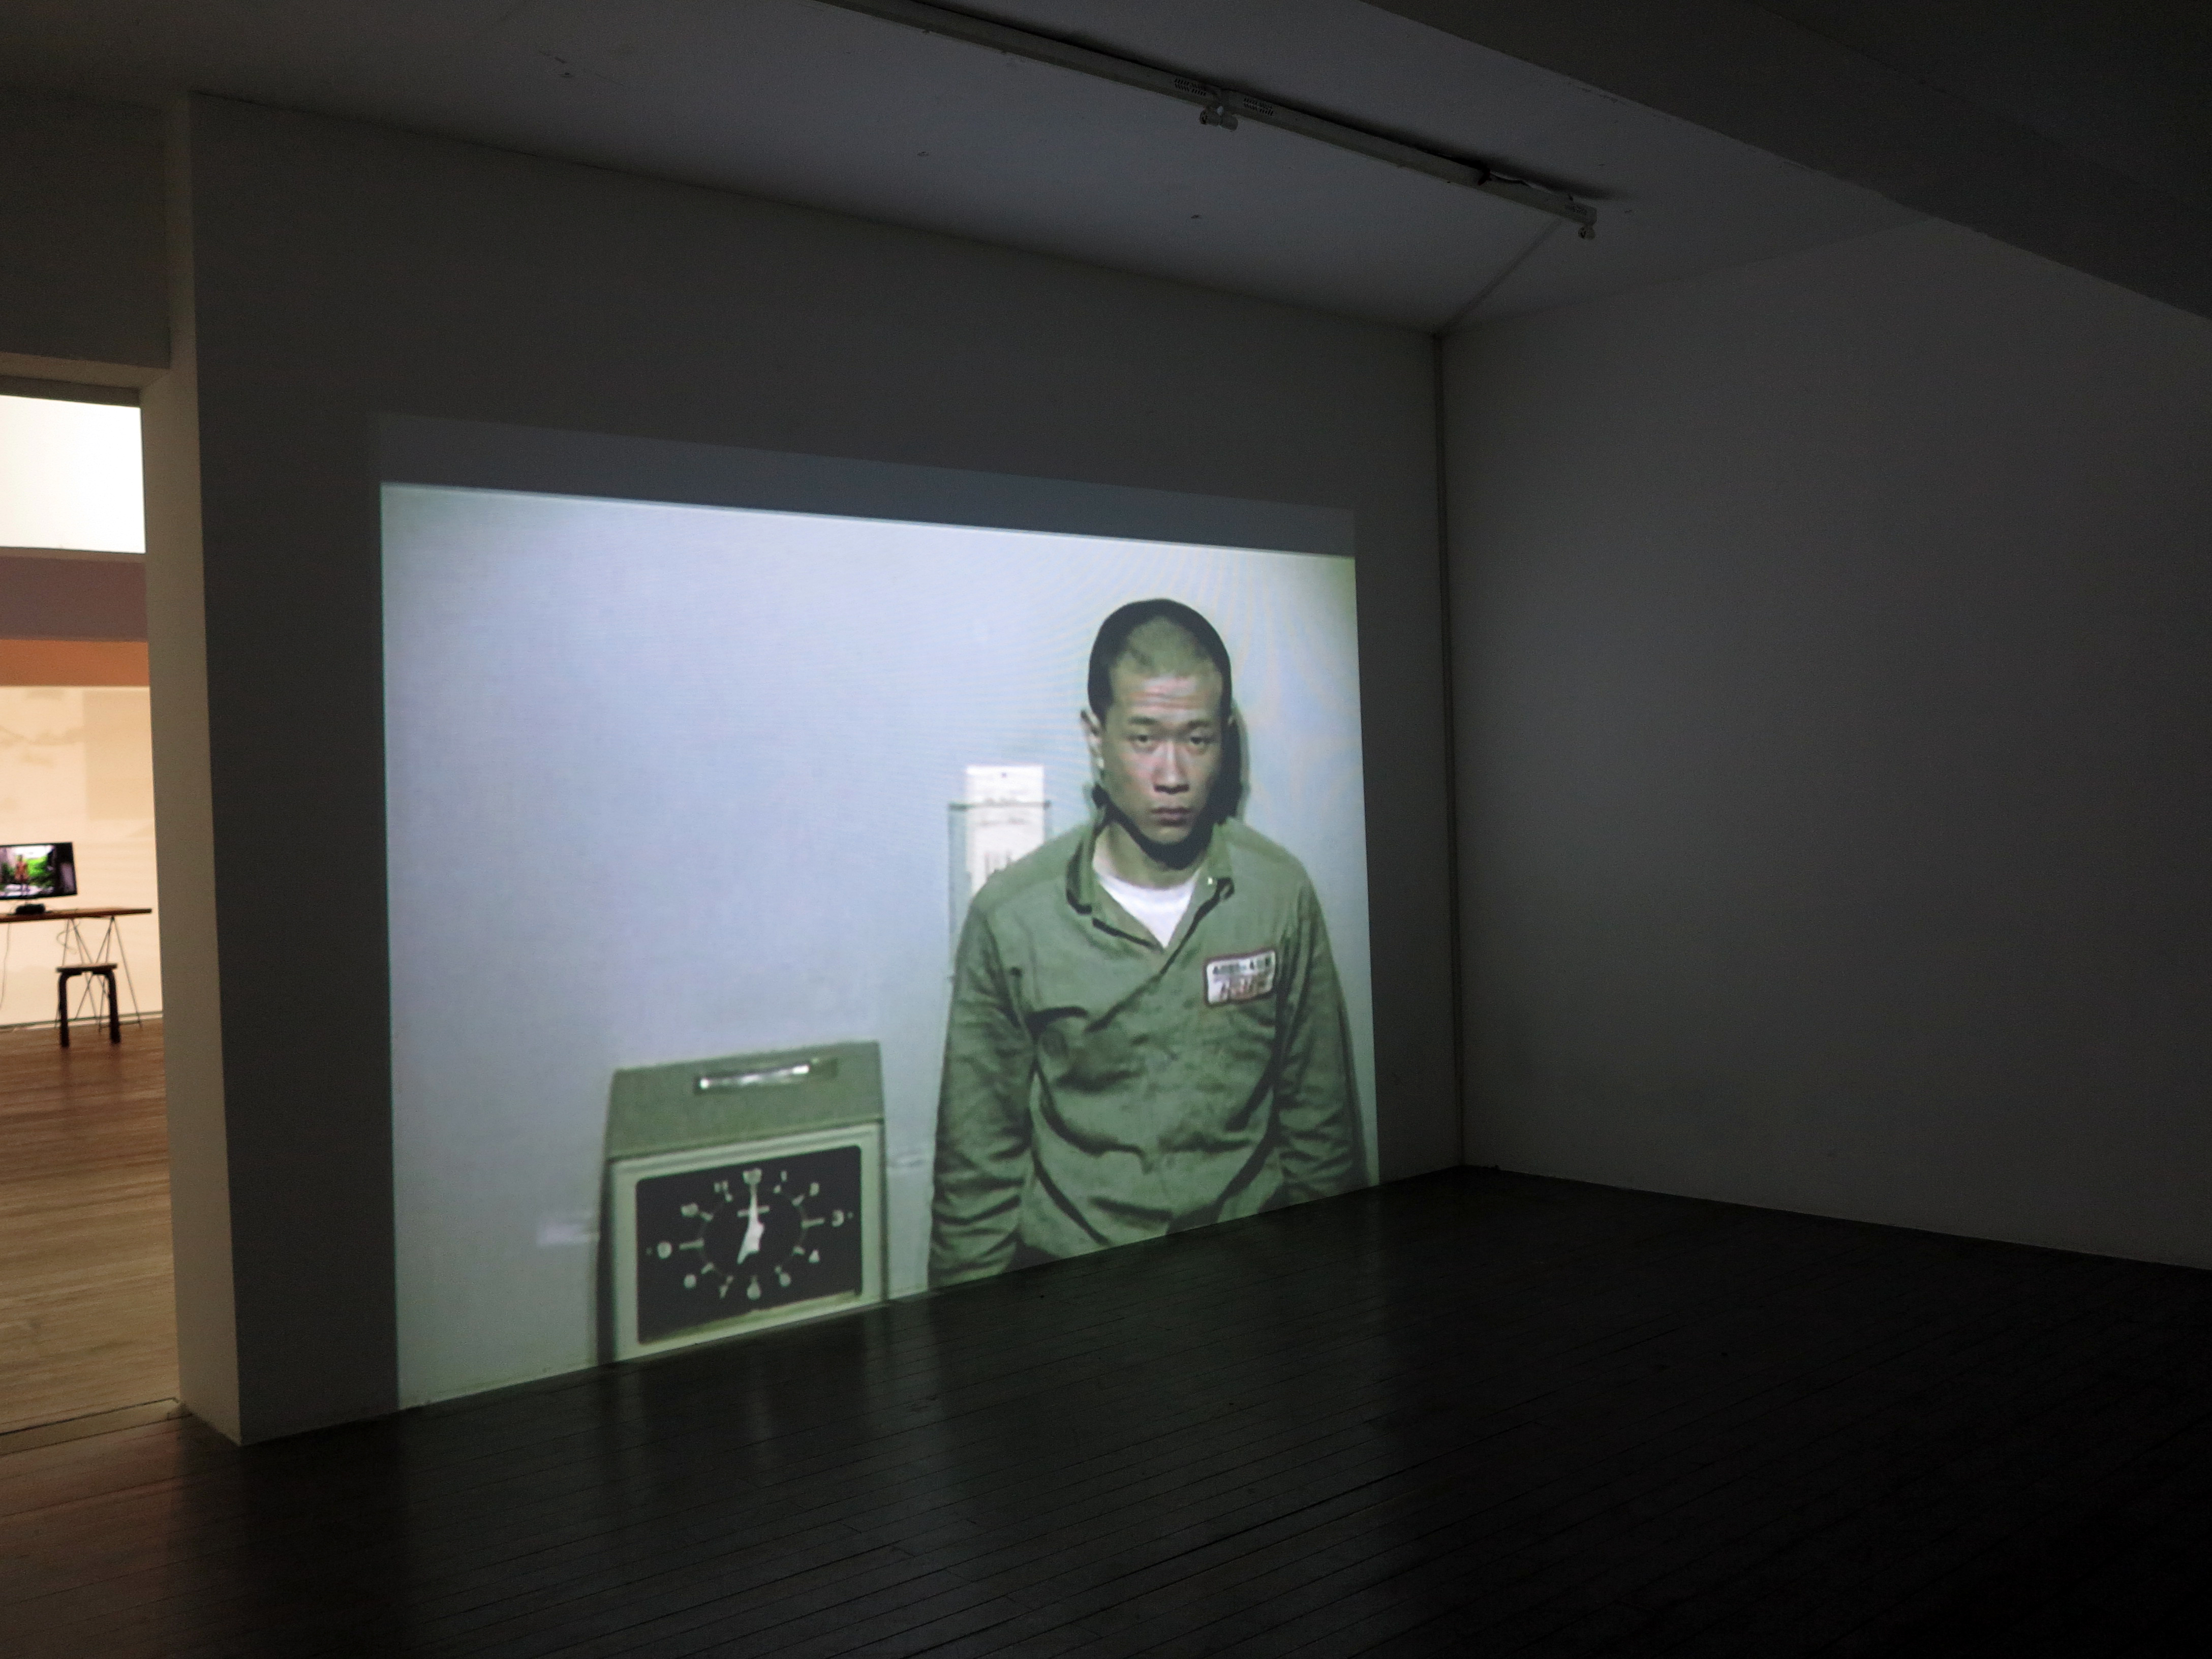 Tehching Hsieh 謝德慶 One Year Performance 1980–1981 (Time Clock Piece)